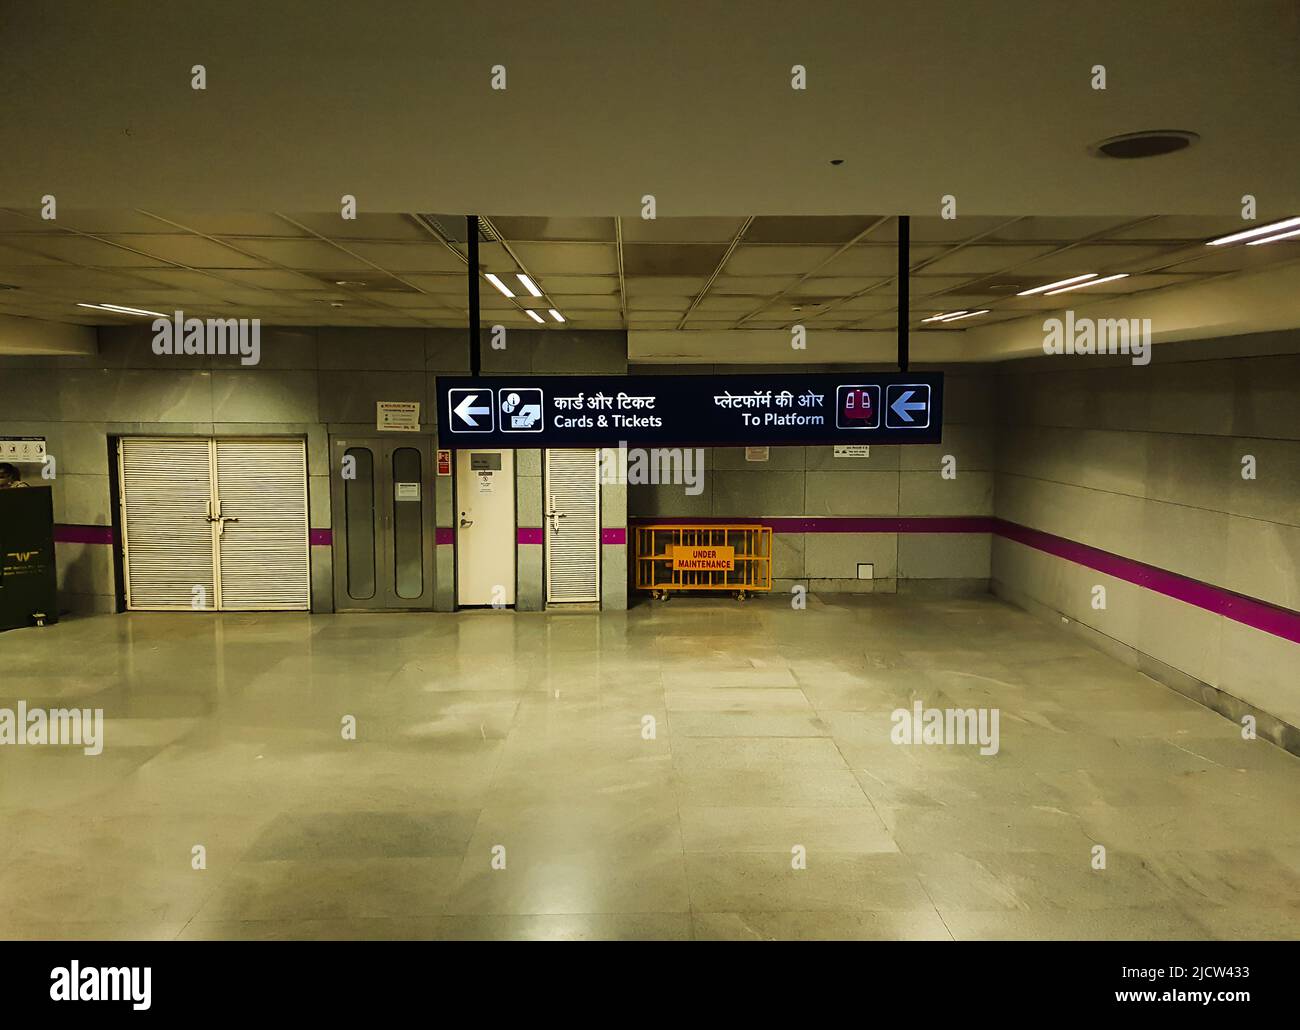 isolated metro station with sign board showing the way of ticket counter at day image is taken at delhi metro station new delhi india on Apr 10 2020. Stock Photo